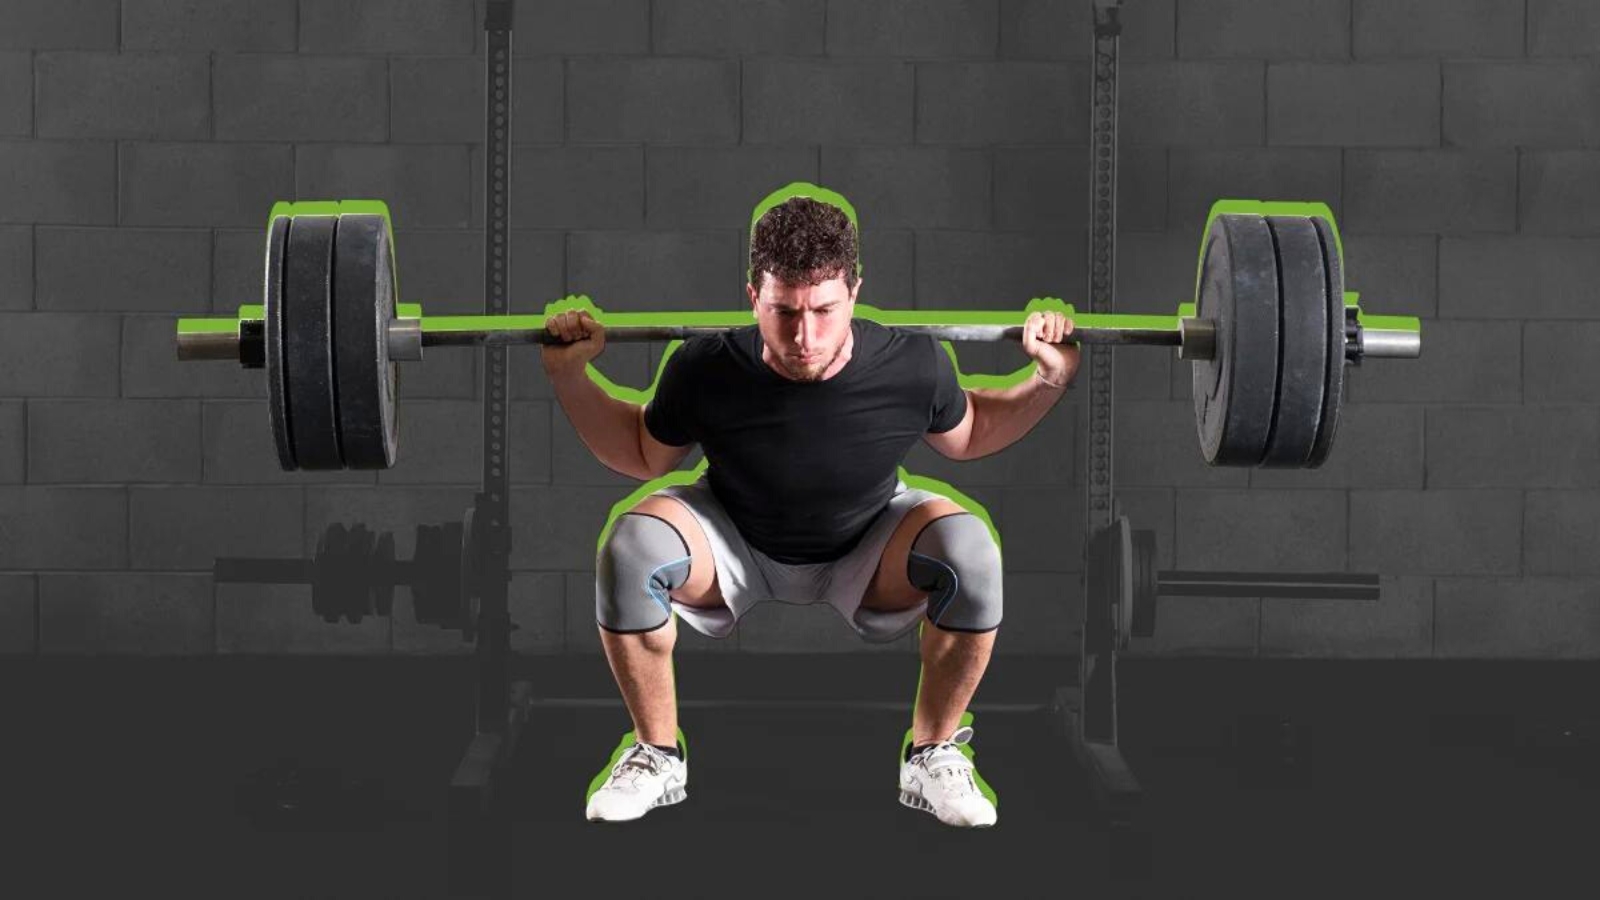 https://barbend.com/wp-content/uploads/2022/02/Barbend-Featured-Image-1600x900-The-15-Best-Barbell-Exercises-For-Mass-Strength-and-Power.jpg